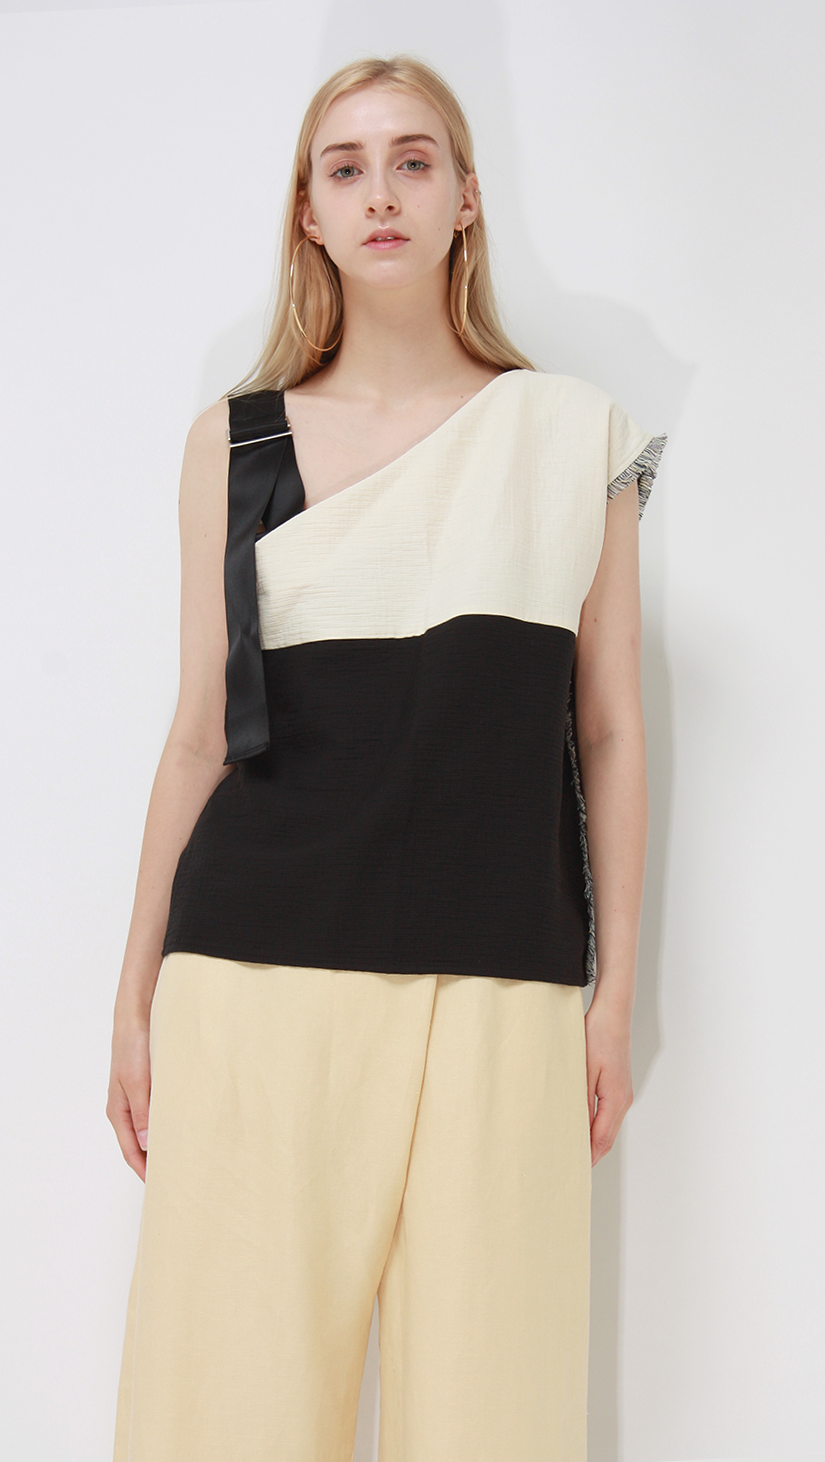 Francis Top, a lightweight one off-the-shoulder top in classic Cream/Black